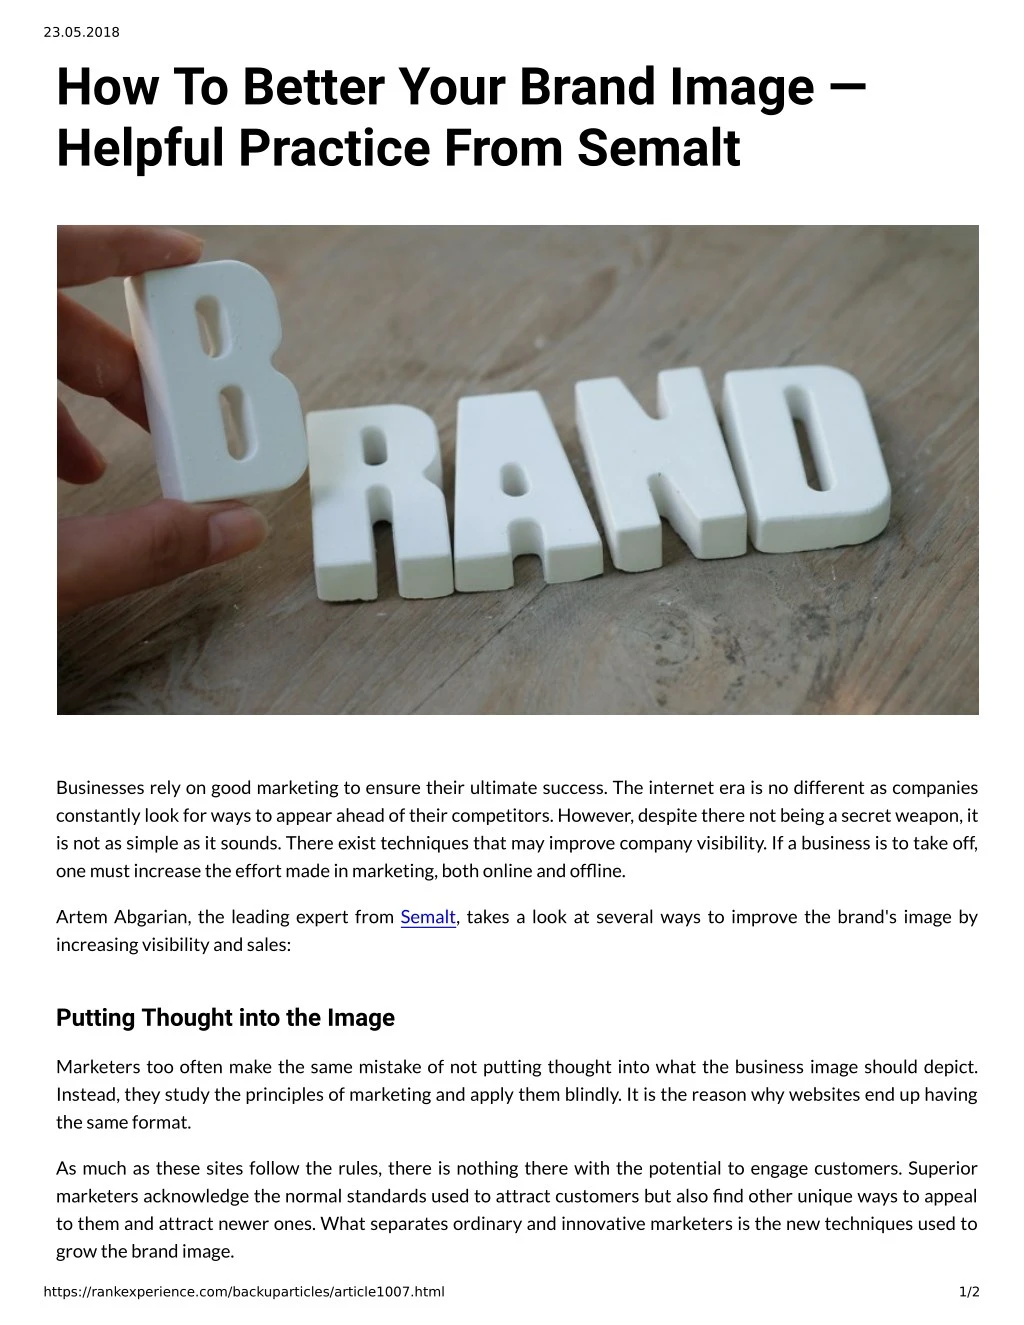 23 05 2018 how to better your brand image helpful